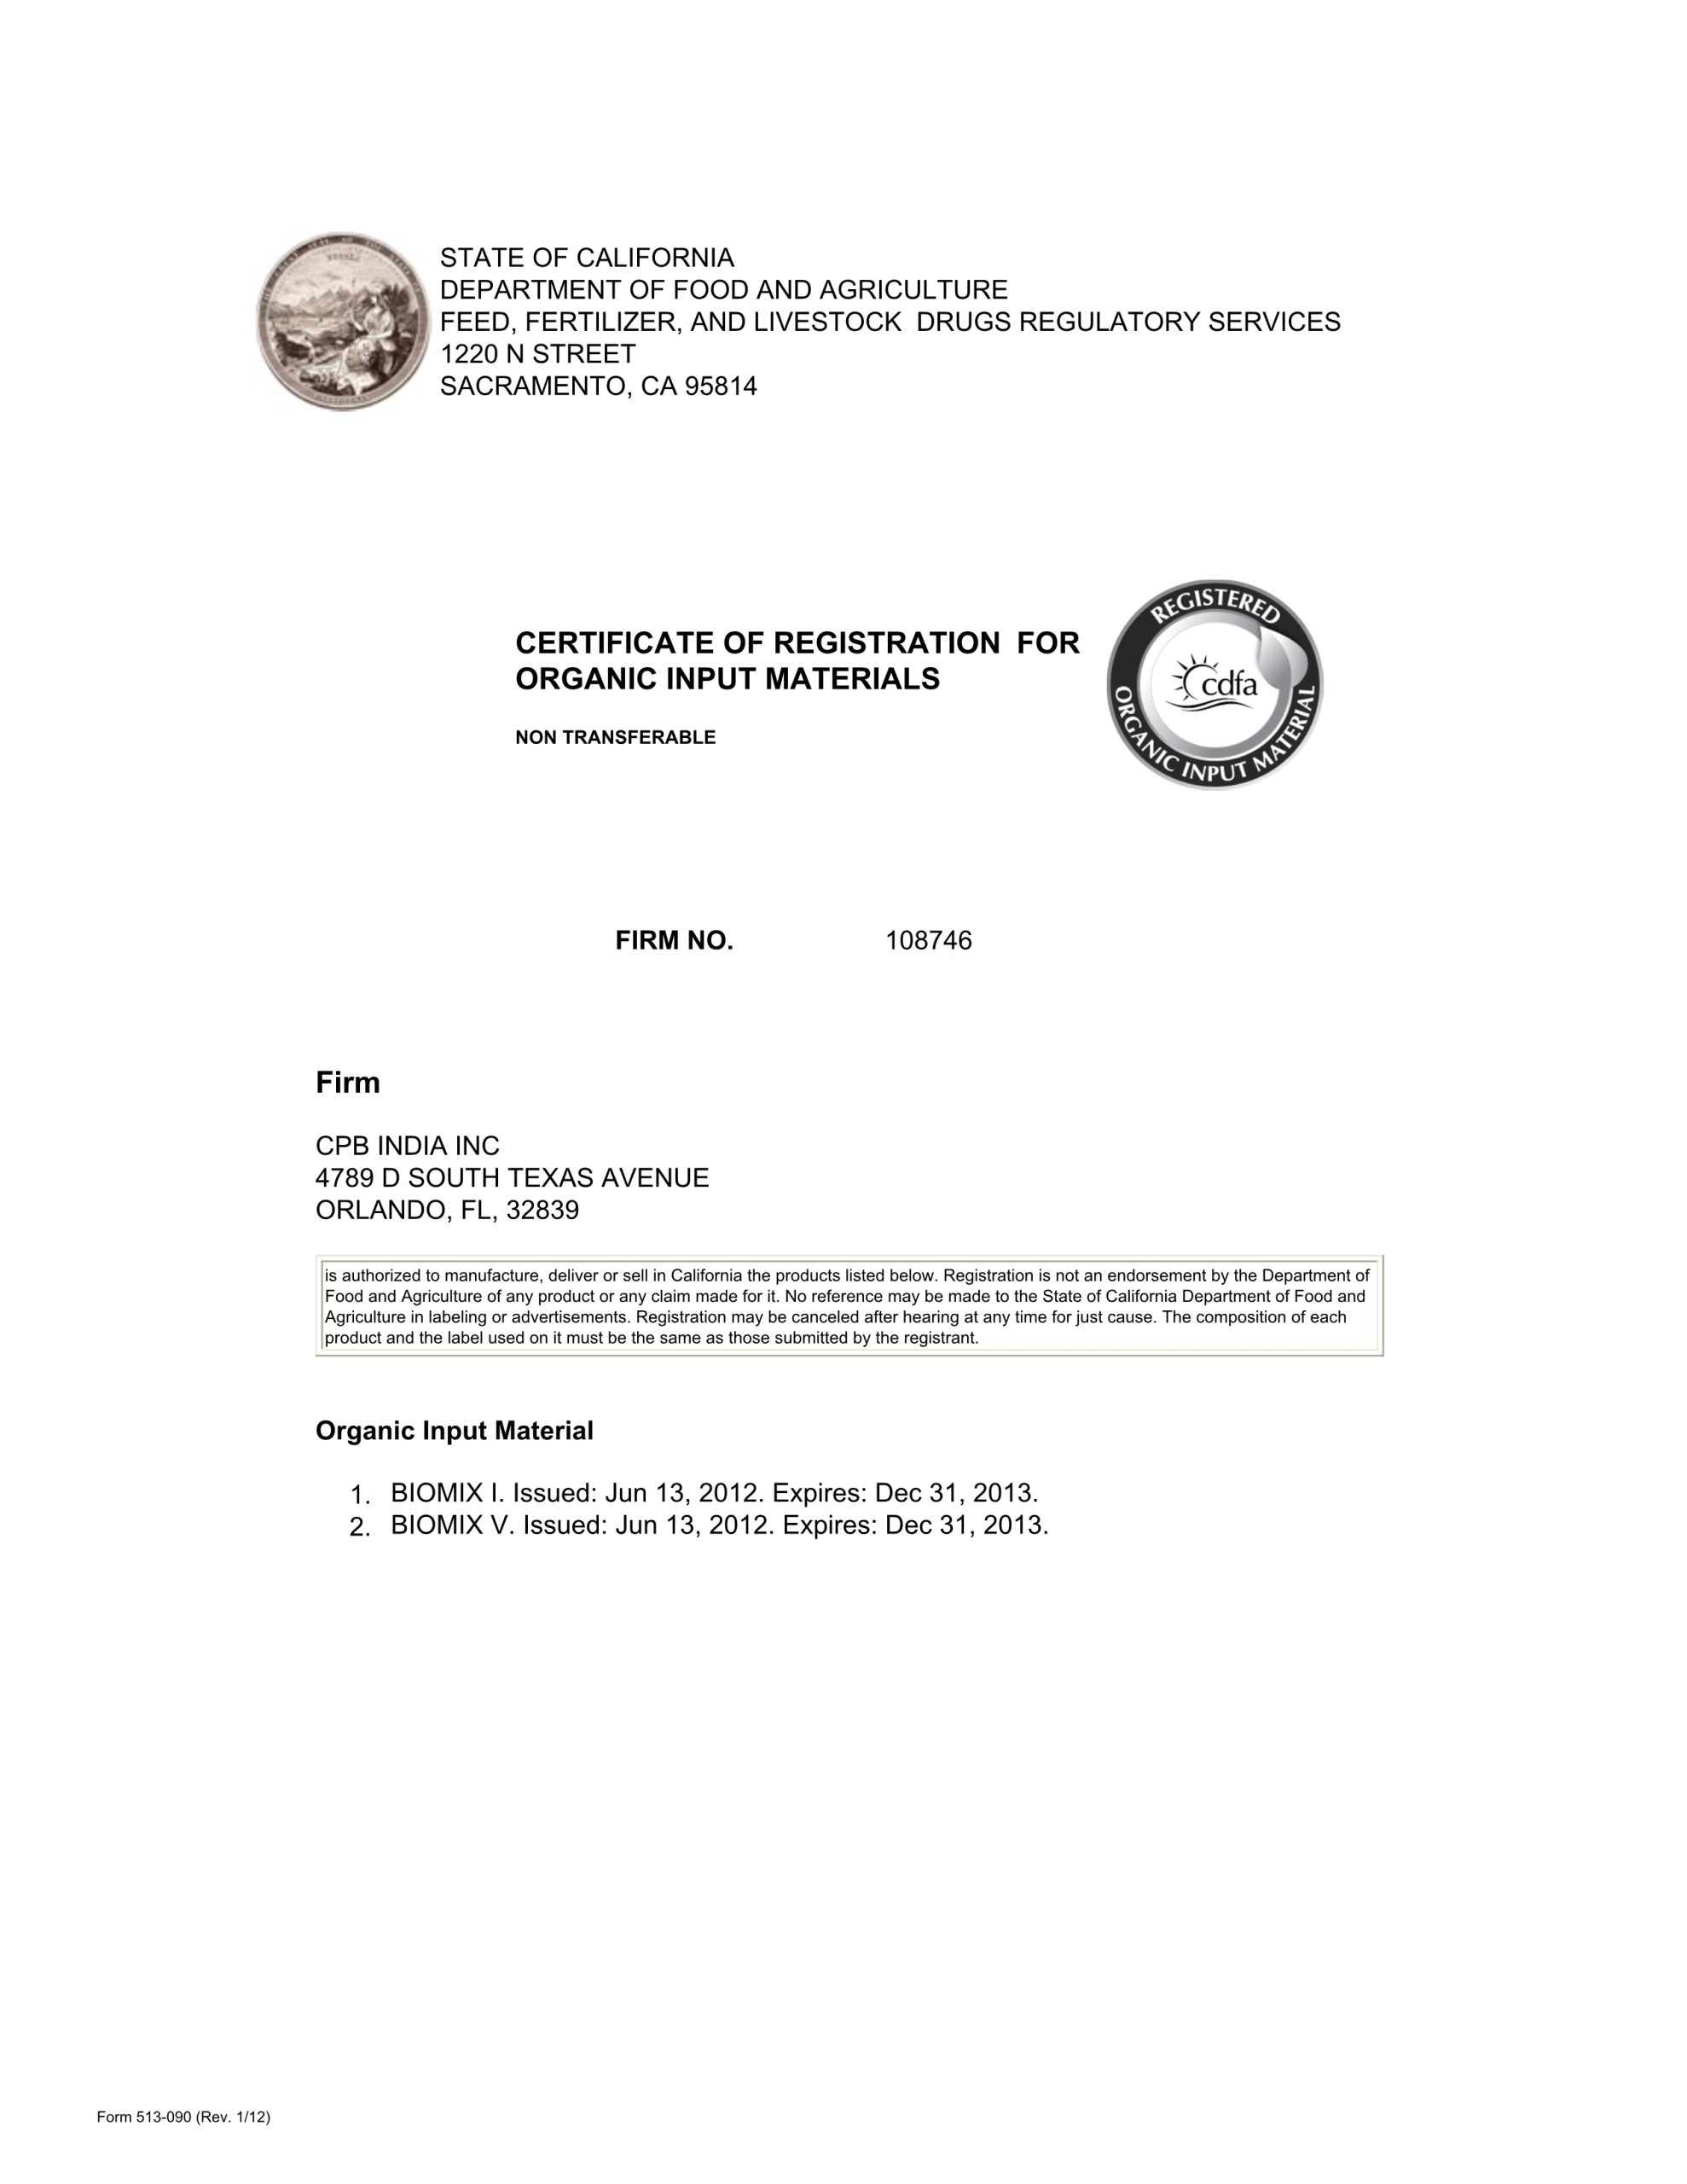 Practical Completion Certificate Template Jct - Compilation 2020 Throughout Practical Completion Certificate Template Uk